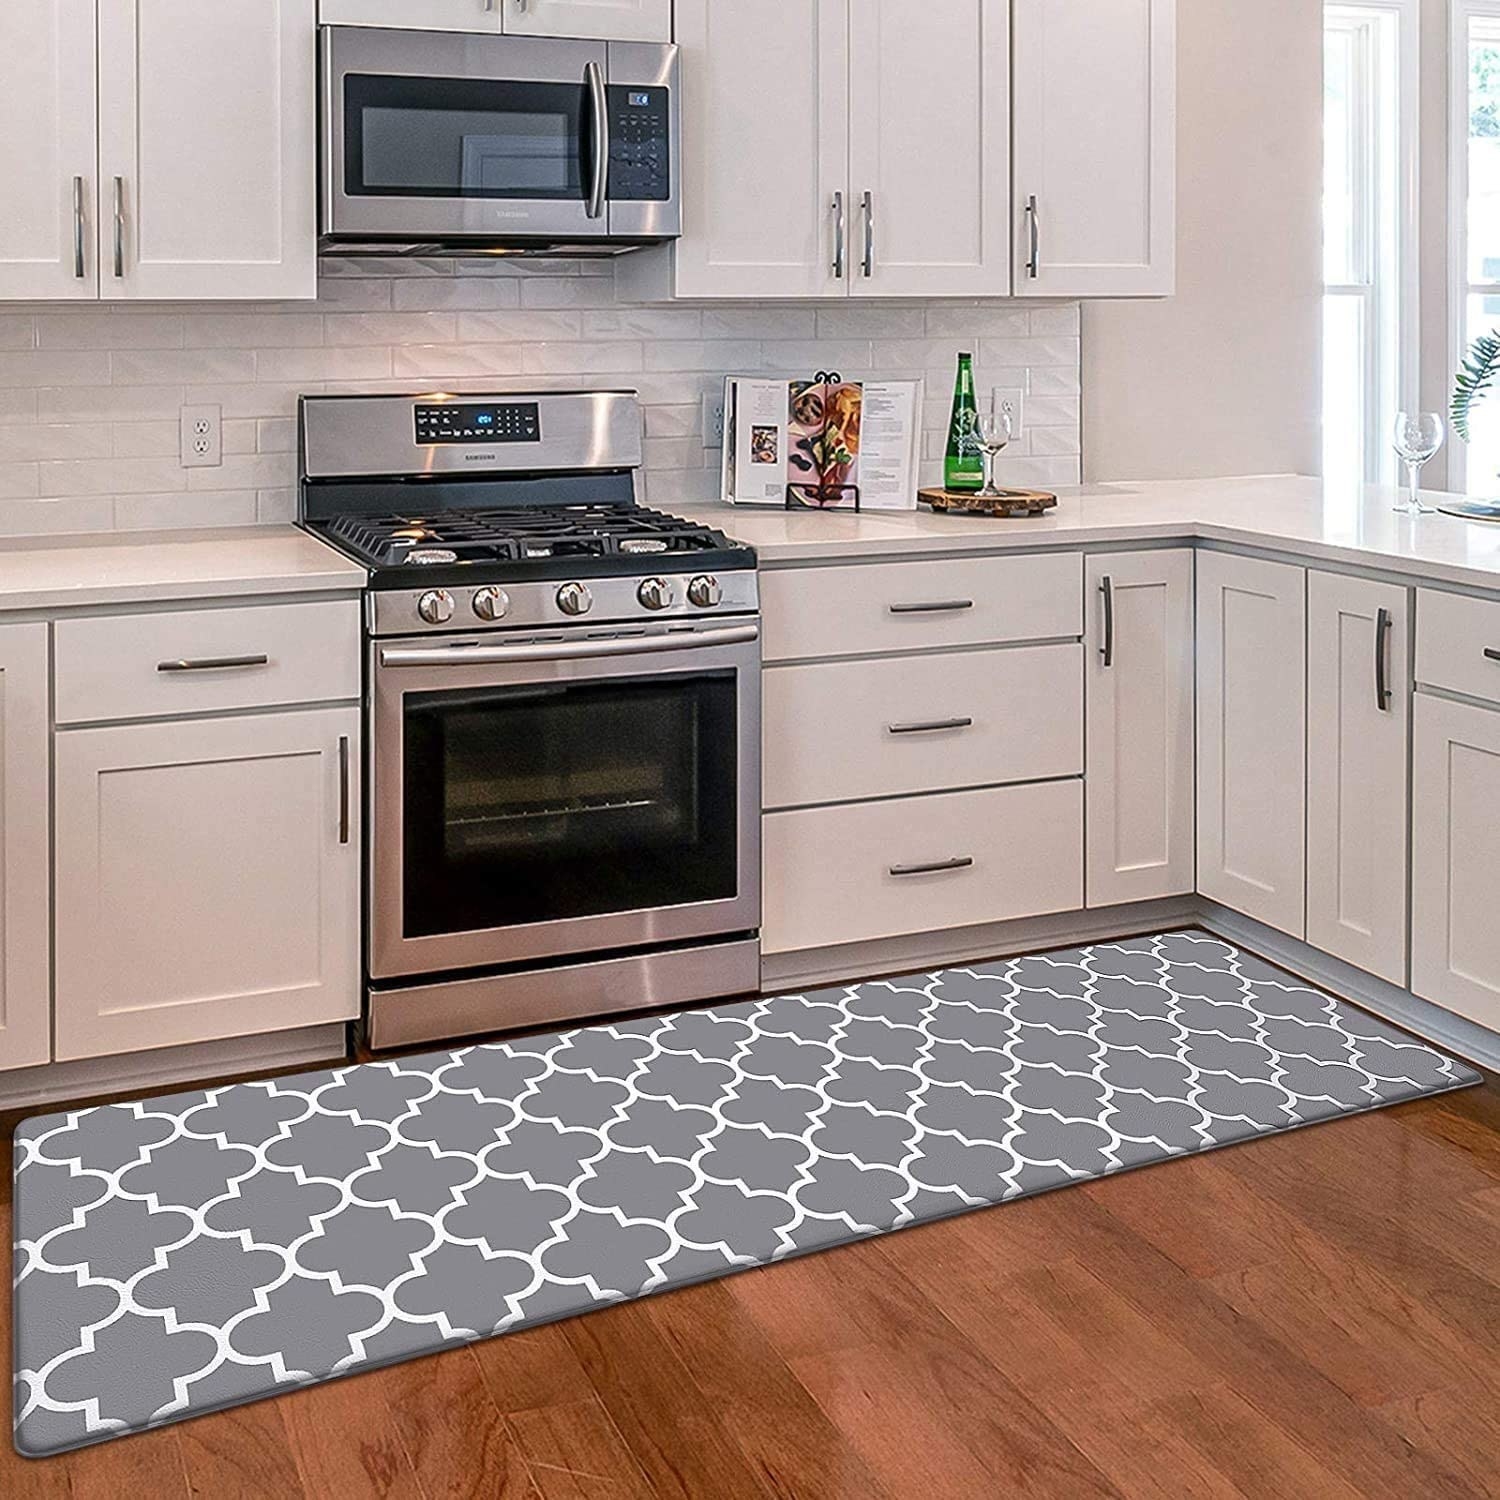 anti-fatigue gray and white patterned kitchen mat below white cabinets and stovetop